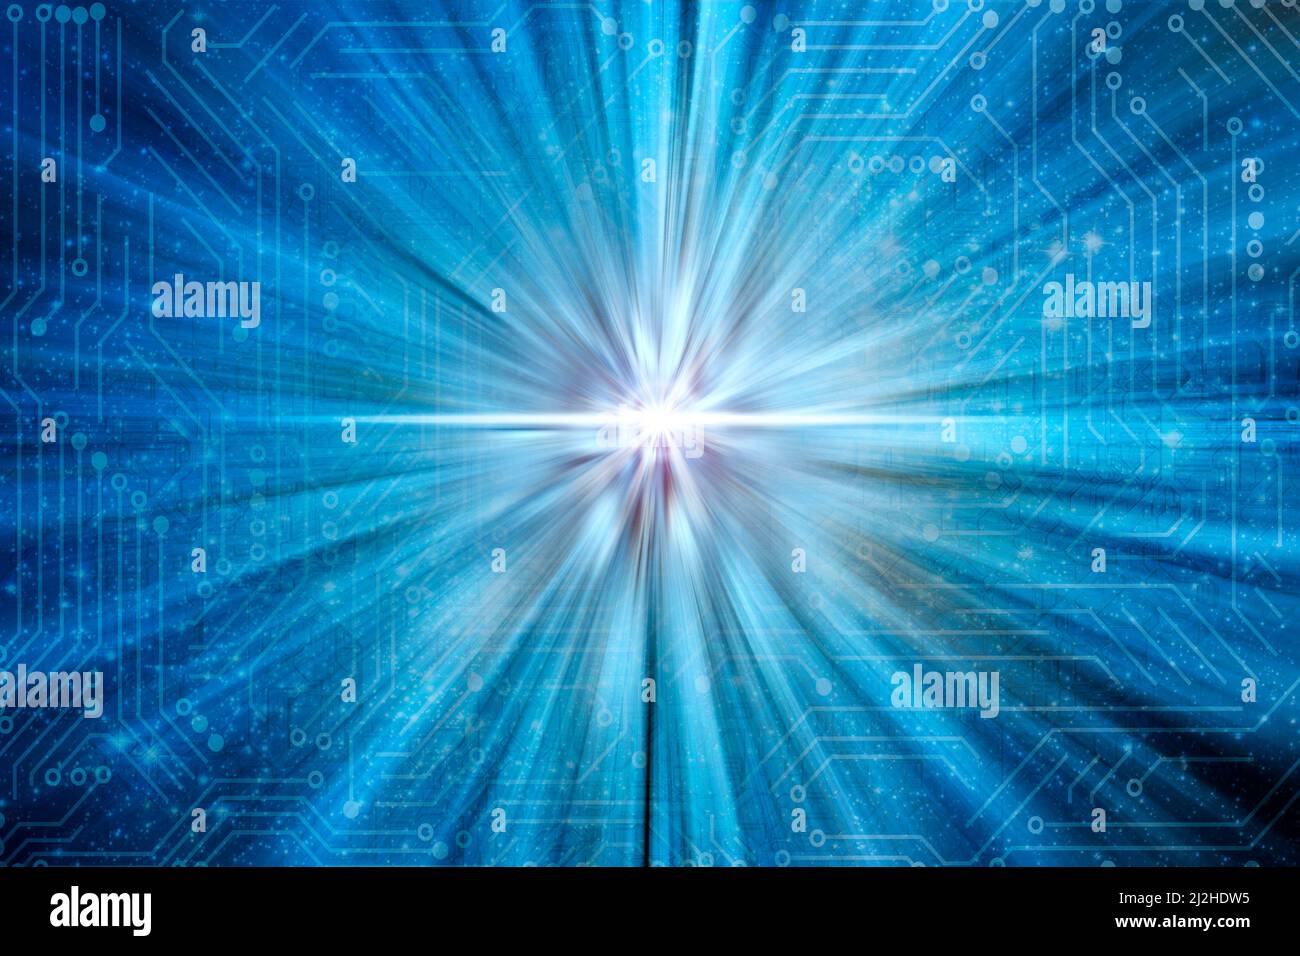 technology abstract blue background Stock Photo